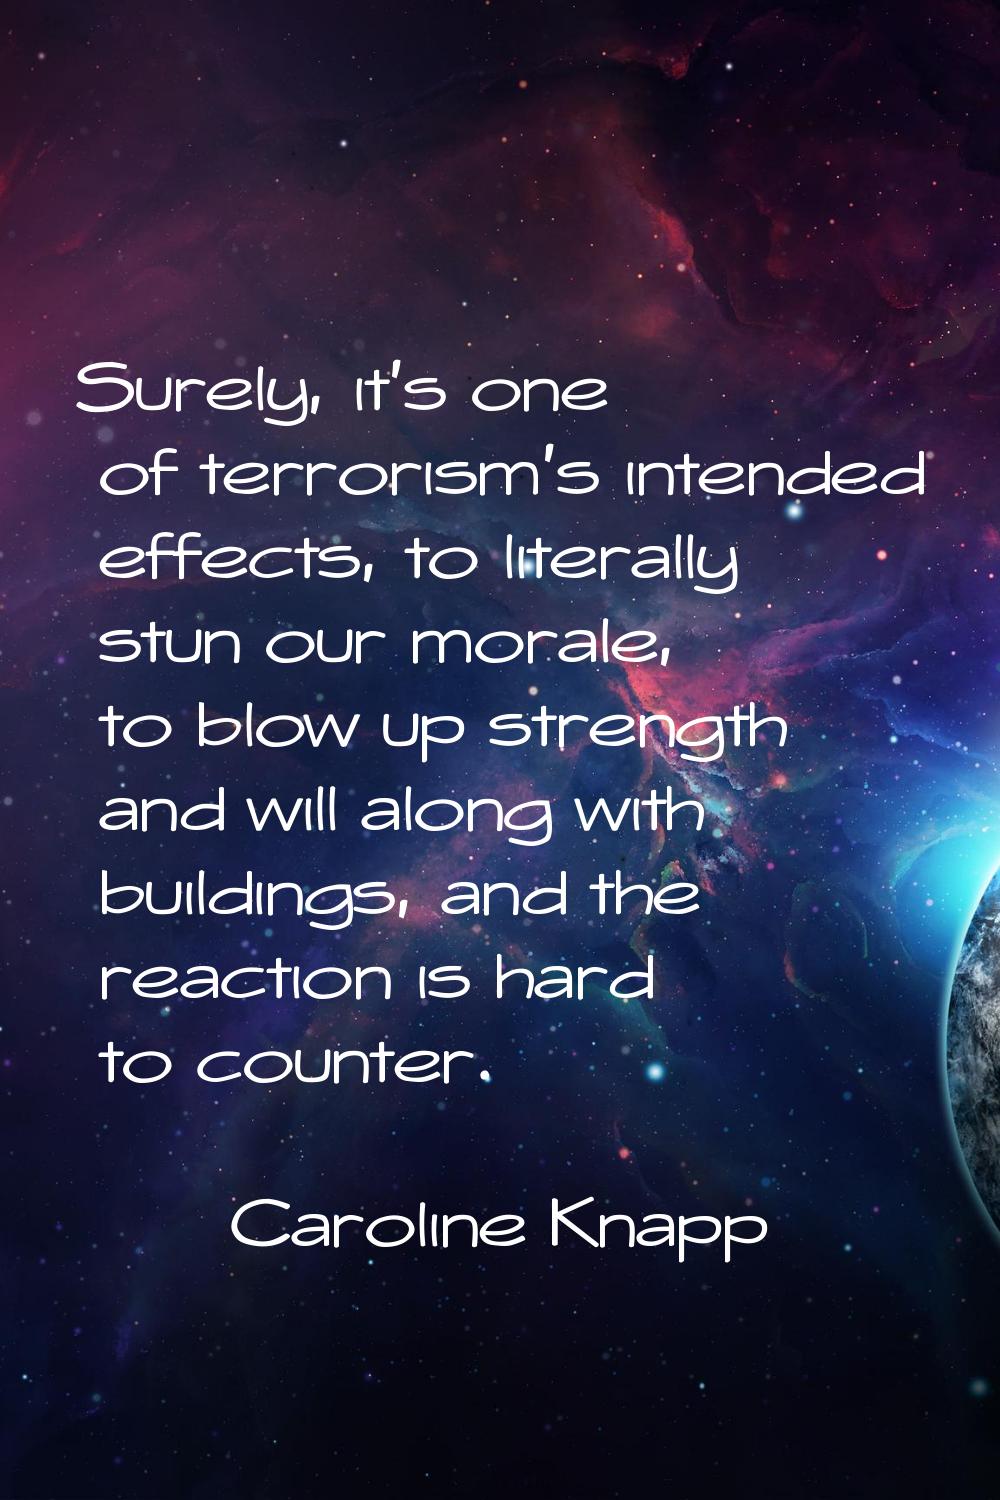 Surely, it's one of terrorism's intended effects, to literally stun our morale, to blow up strength